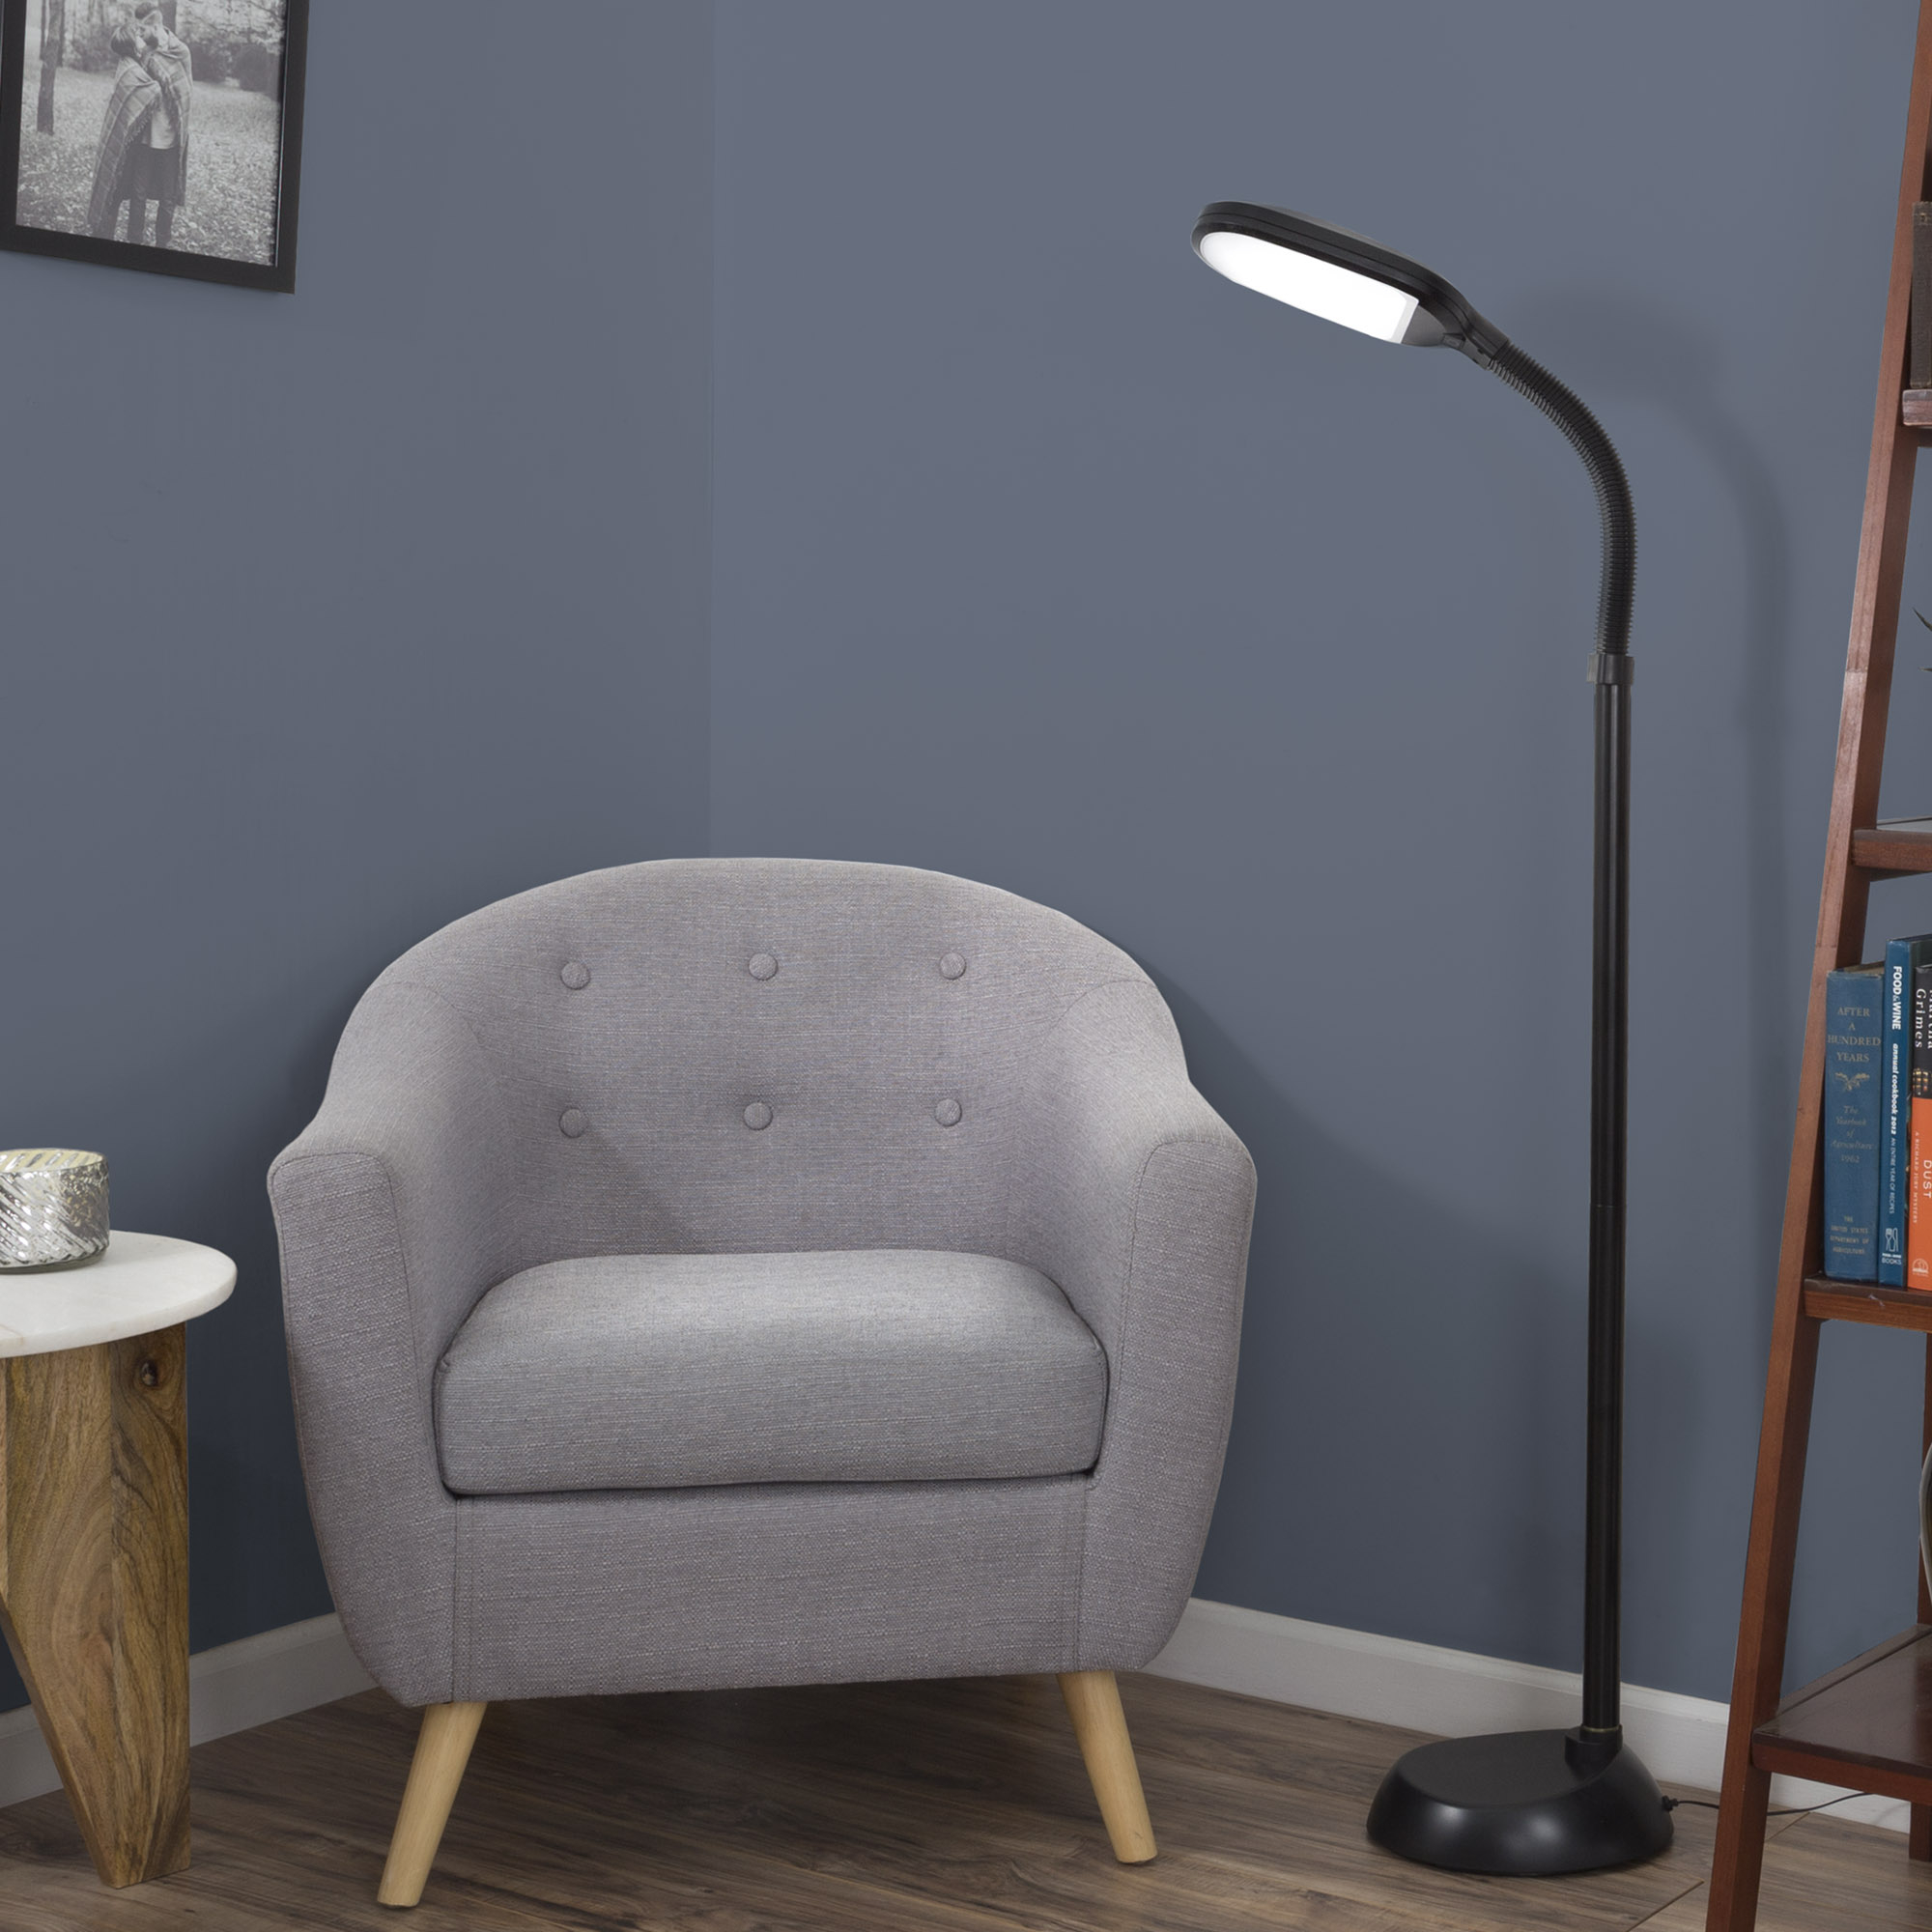 Details About Home Led Sunlight Floor Lamp With Dimmer Switch Adjustable Reading Light Stand with regard to sizing 2000 X 2000